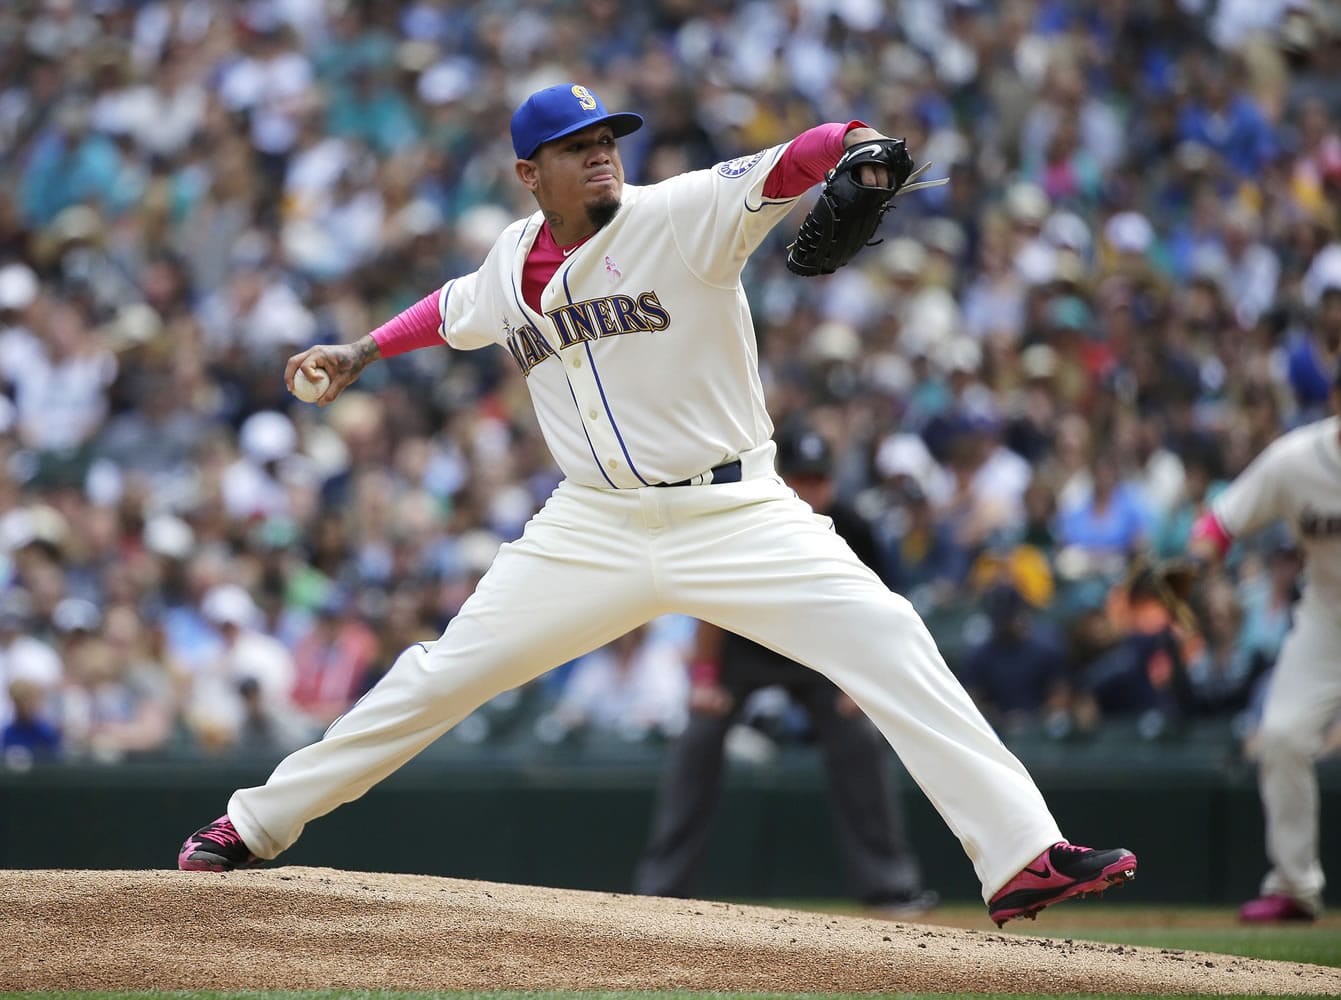 Felix Hernandez reached 2,000 career strikeouts to lead the Seattle Mariners to a 4-3 win against the Oakland Athletics on Sunday, May 10, 2015 in Seattle. Hernandez and other players were wearing pink on Mother's Day for breast cancer awareness. (AP Photo/Ted S.